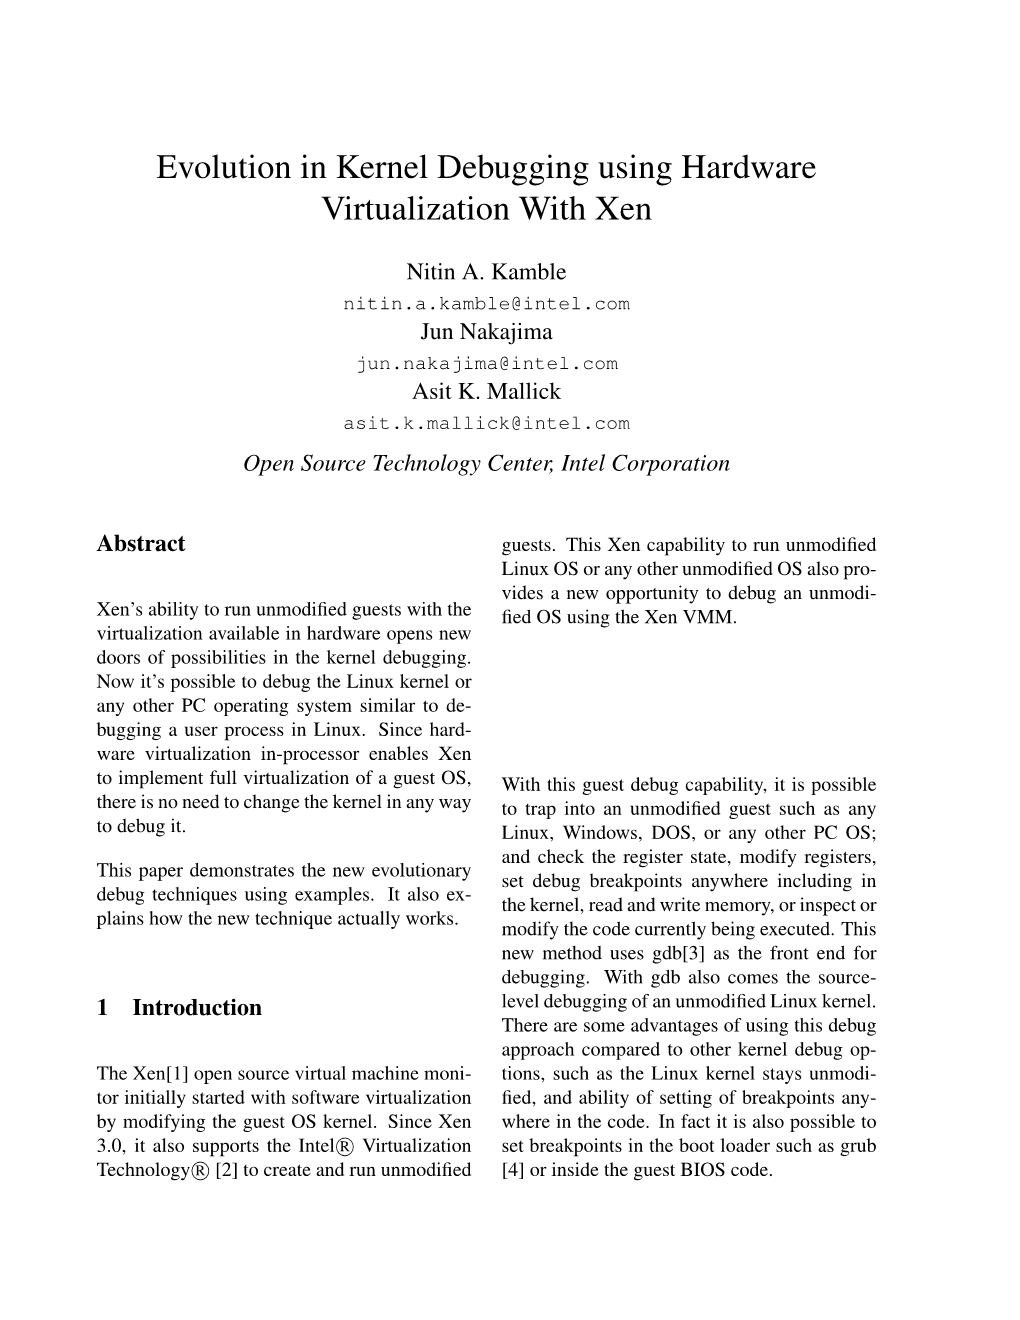 Evolution in Kernel Debugging Using Hardware Virtualization with Xen